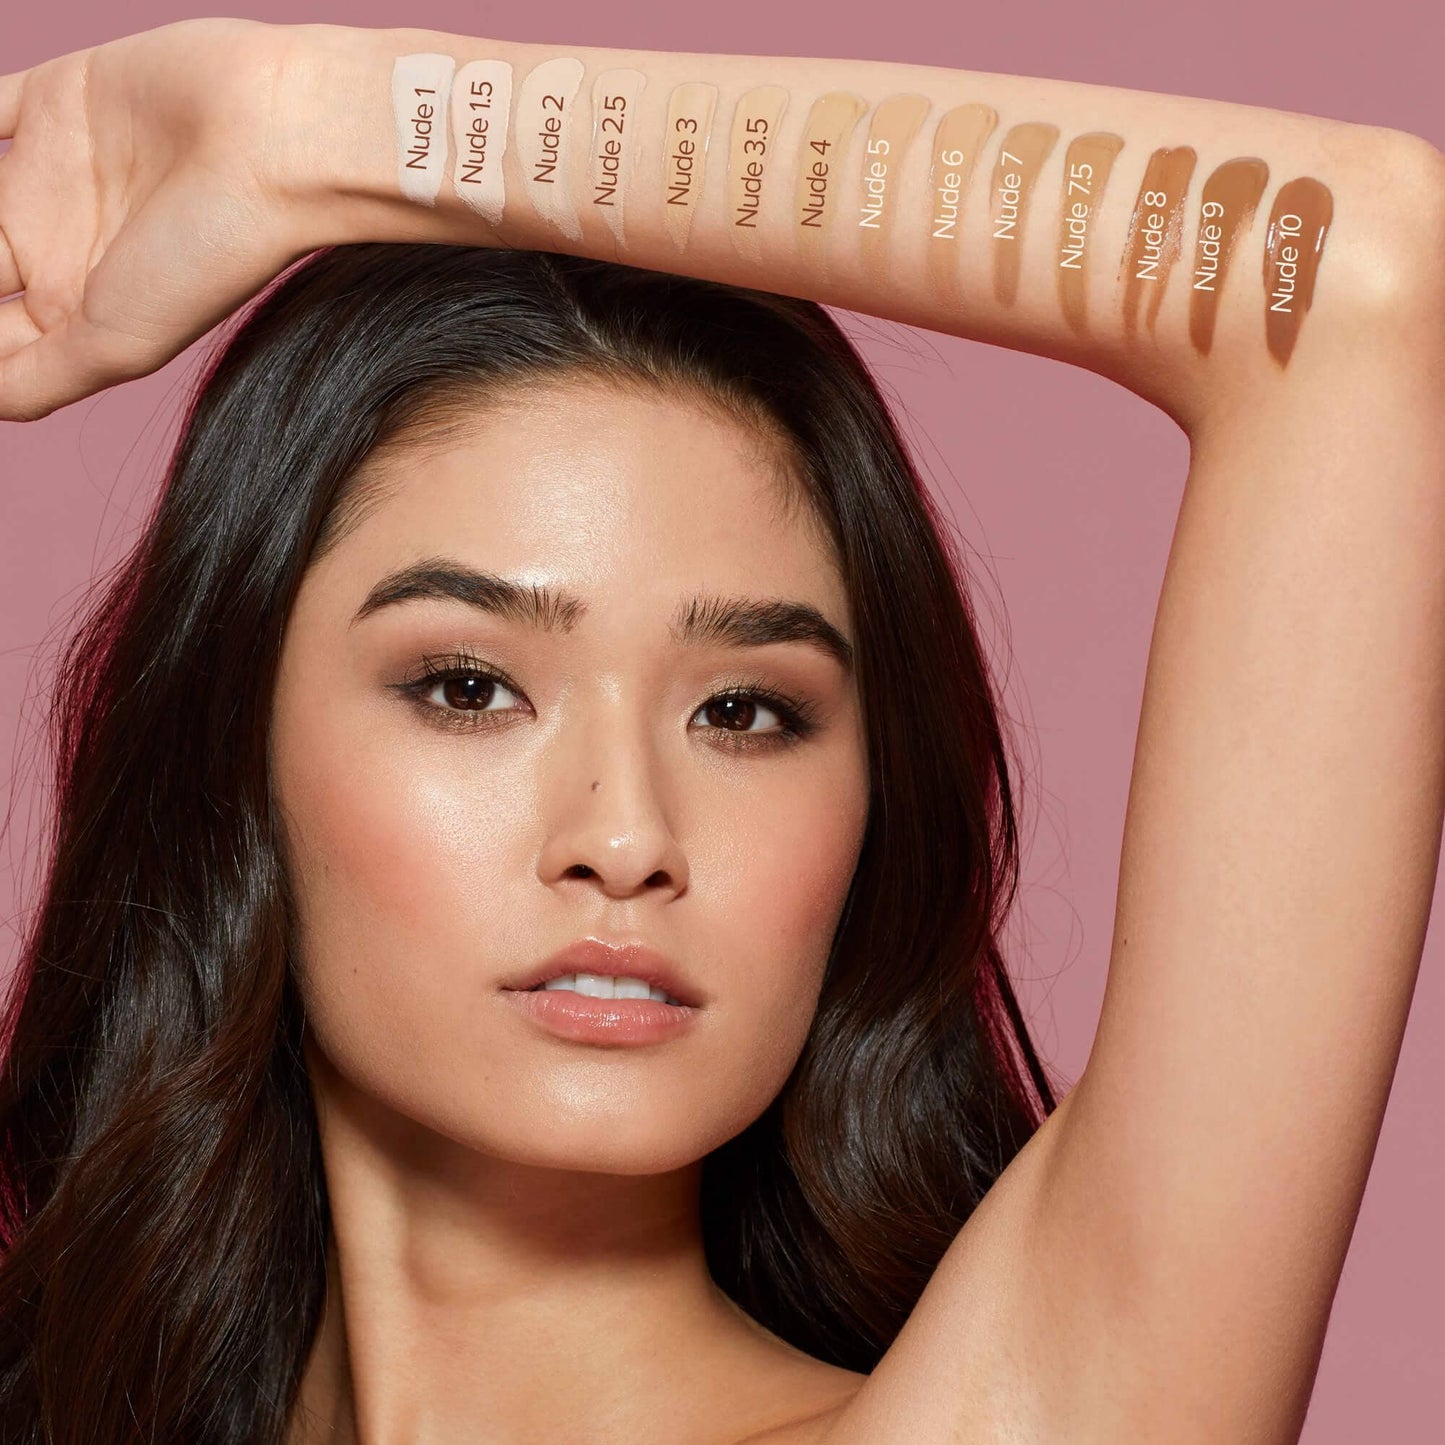 Young woman with arm swatches of Tinted Cover liquid foundation nude 10 and other shades